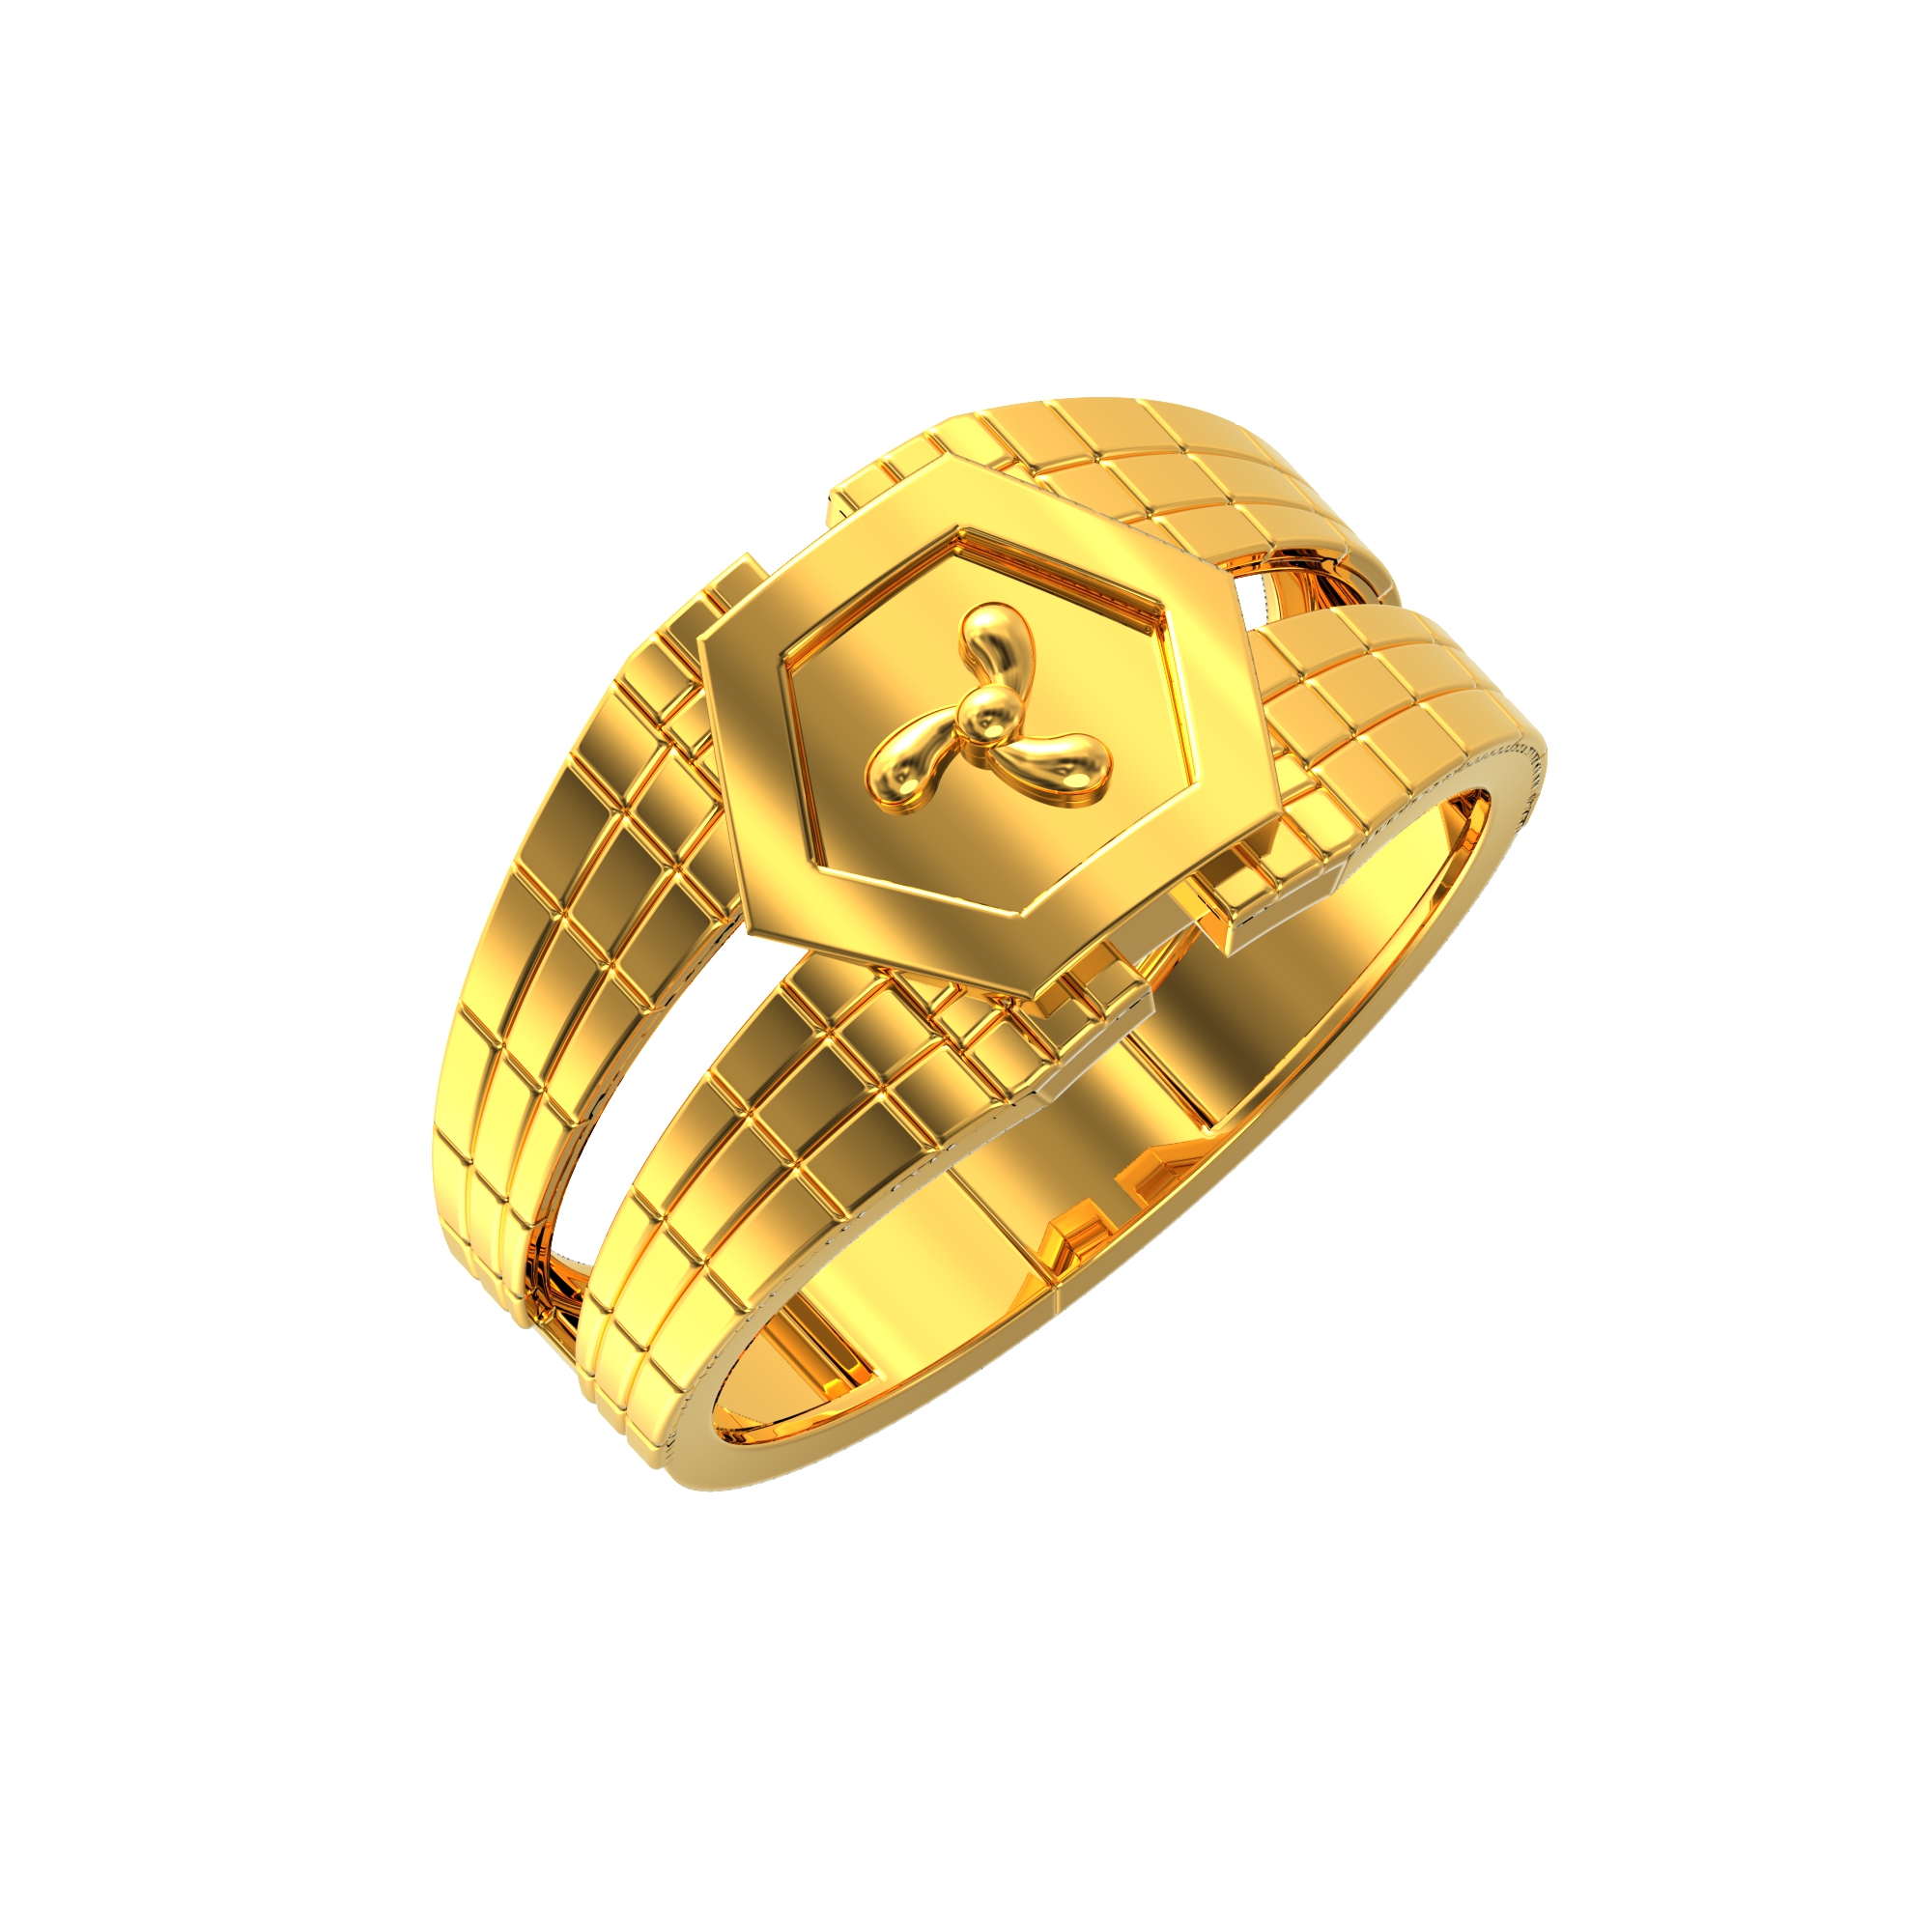 Floral Design Gold Male Ring Poonamallee